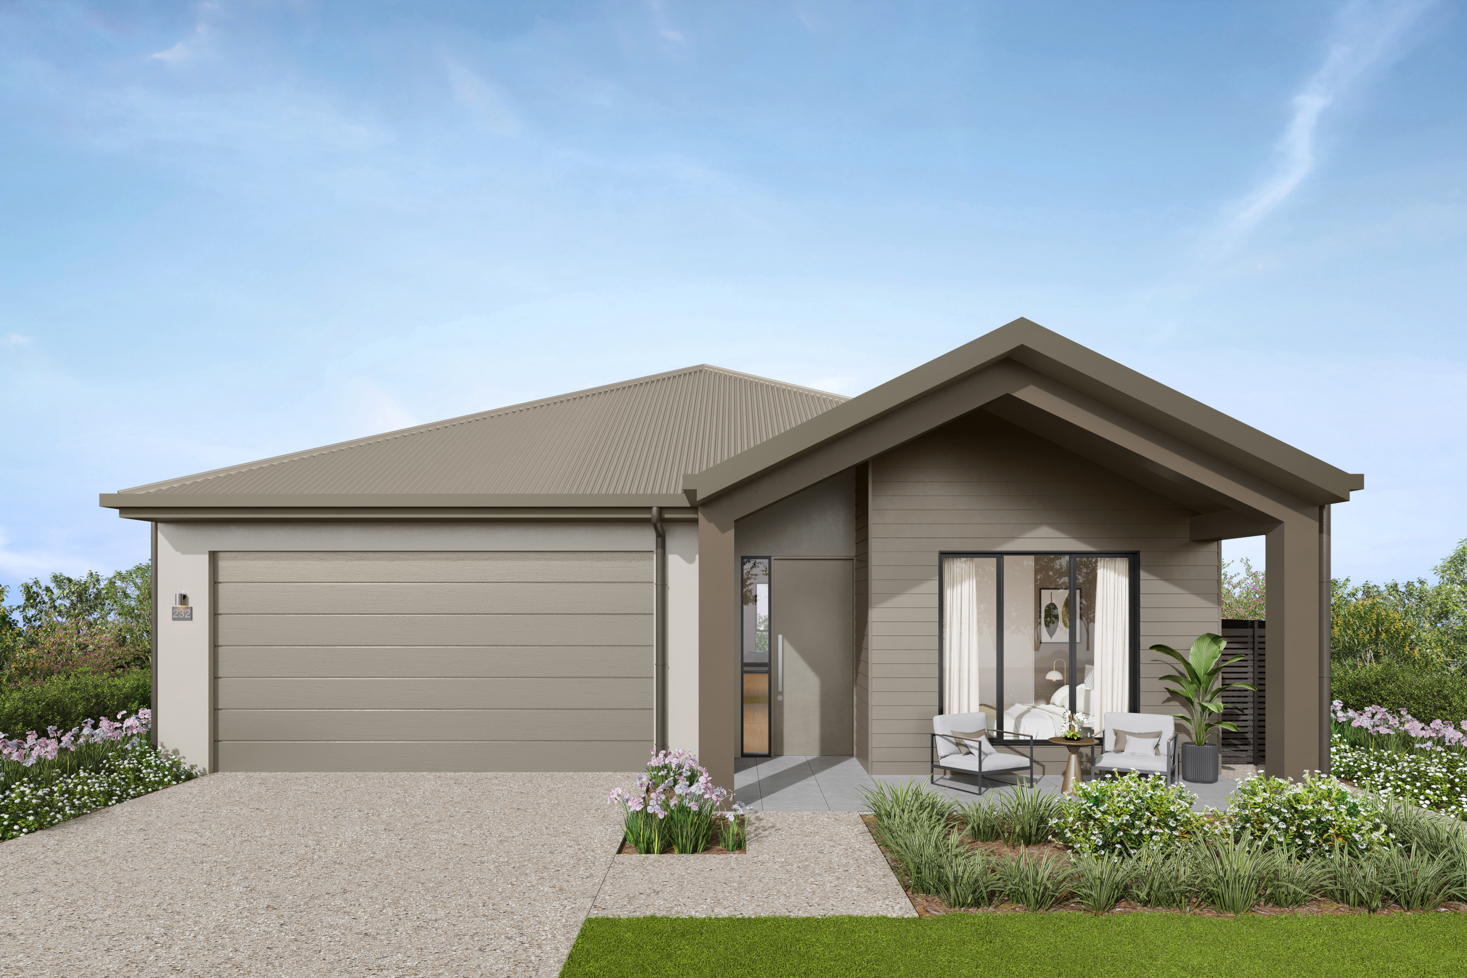 Facade render of the Daintree G4 house design with a gable facade in country colour scheme, located at Stockland Halcyon Gables in The Hills district. 